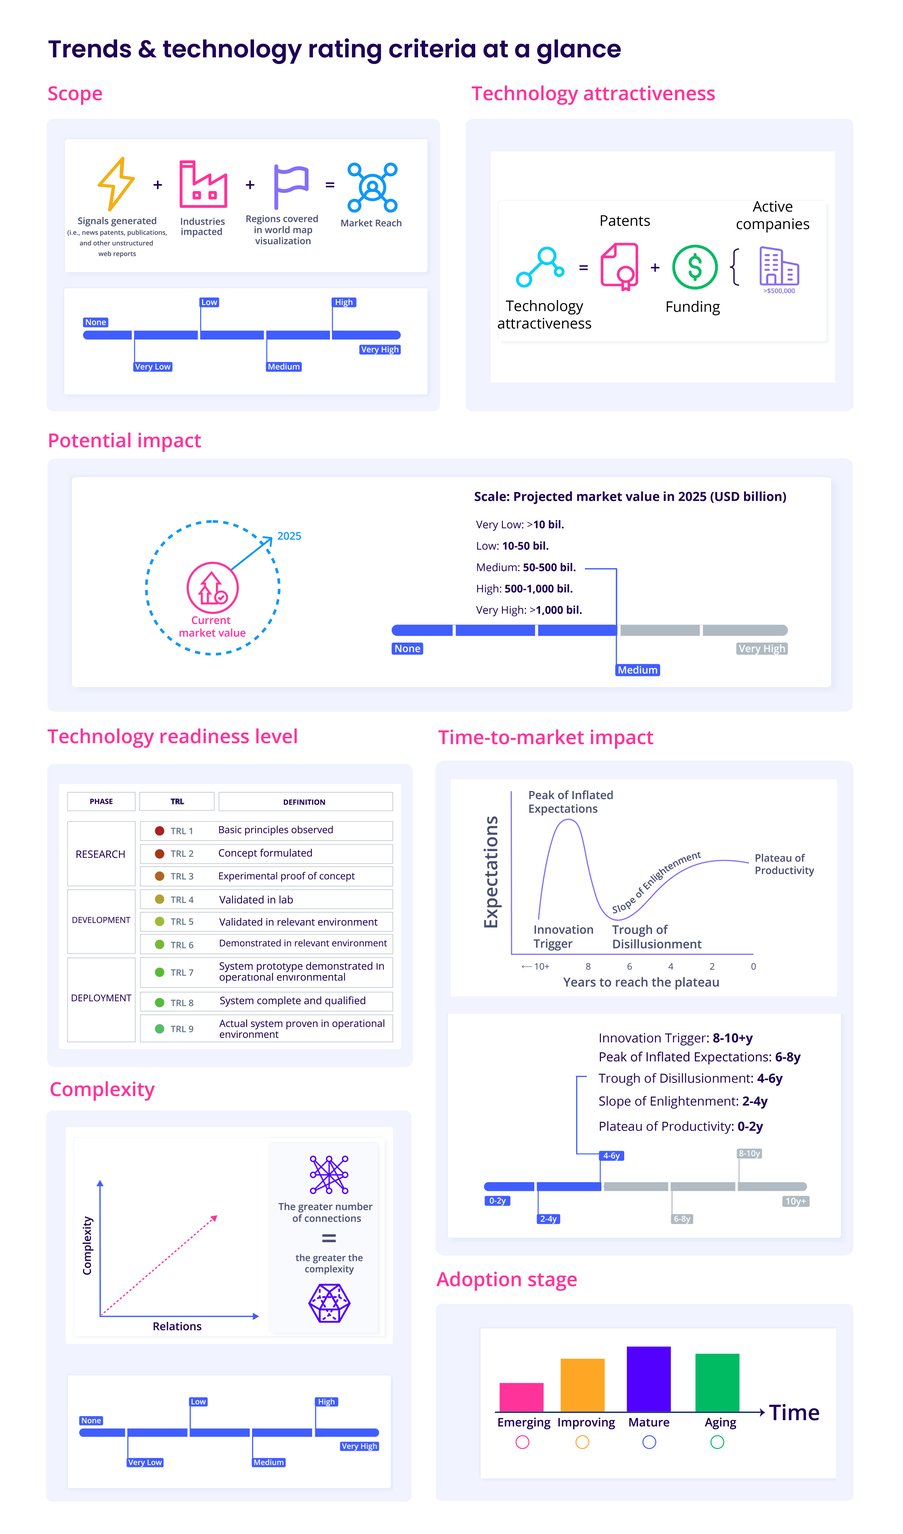 ITONICS Trend and Technology Rating Criteria at a Glance